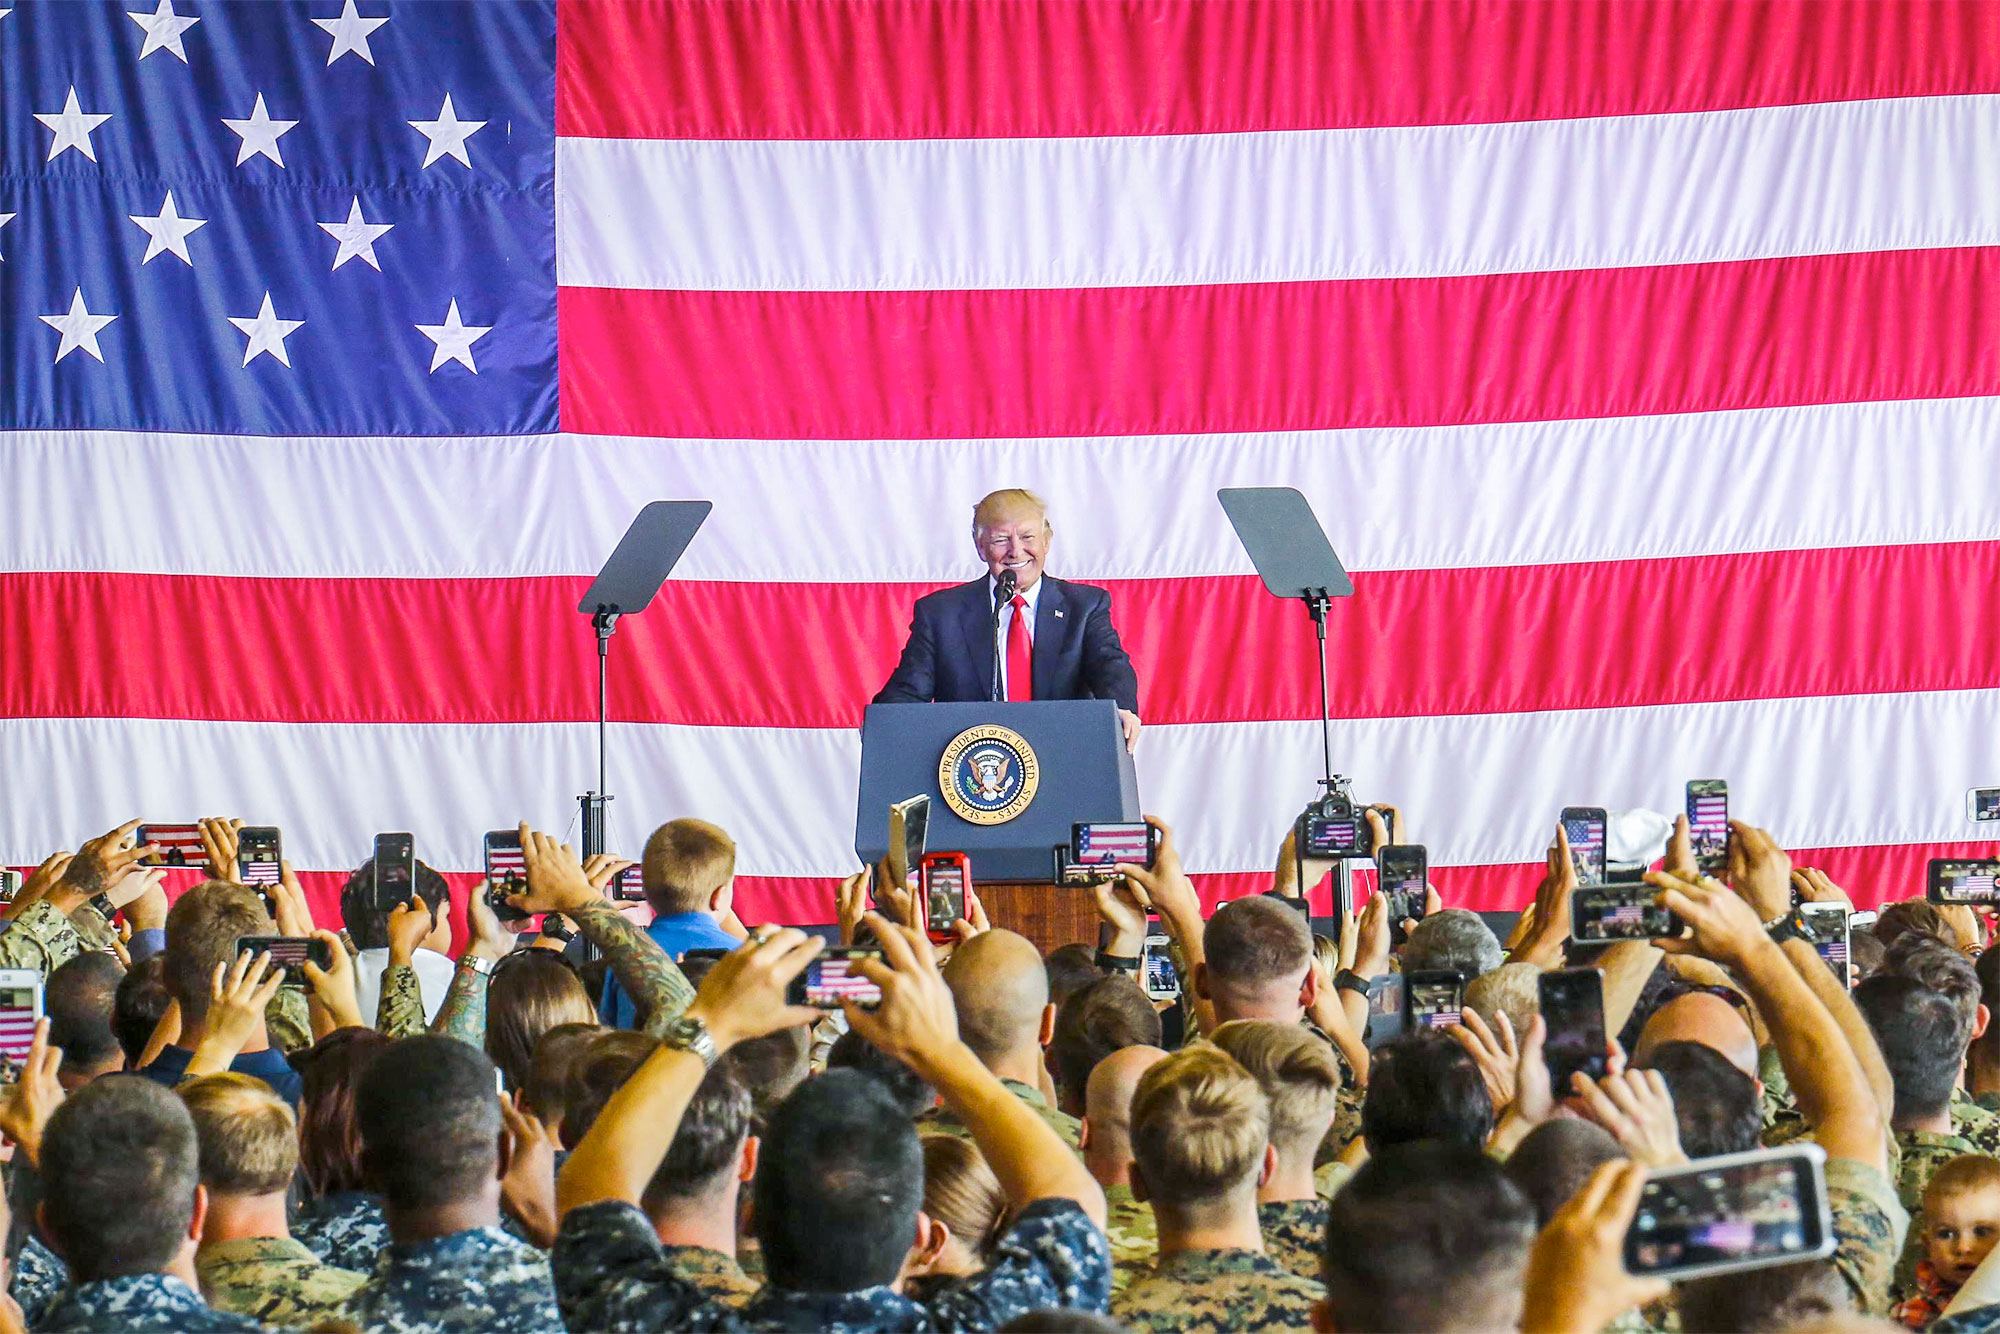 President Donald J. Trump speaks to U.S. service members and their families at Naval Air Station Sigonella, Italy, May 27, 2017. Trump traveled to Sicily to attend the G7 Summit and meet with world leaders. U.S. Marine Corps photo by Sgt. Samuel Guerra